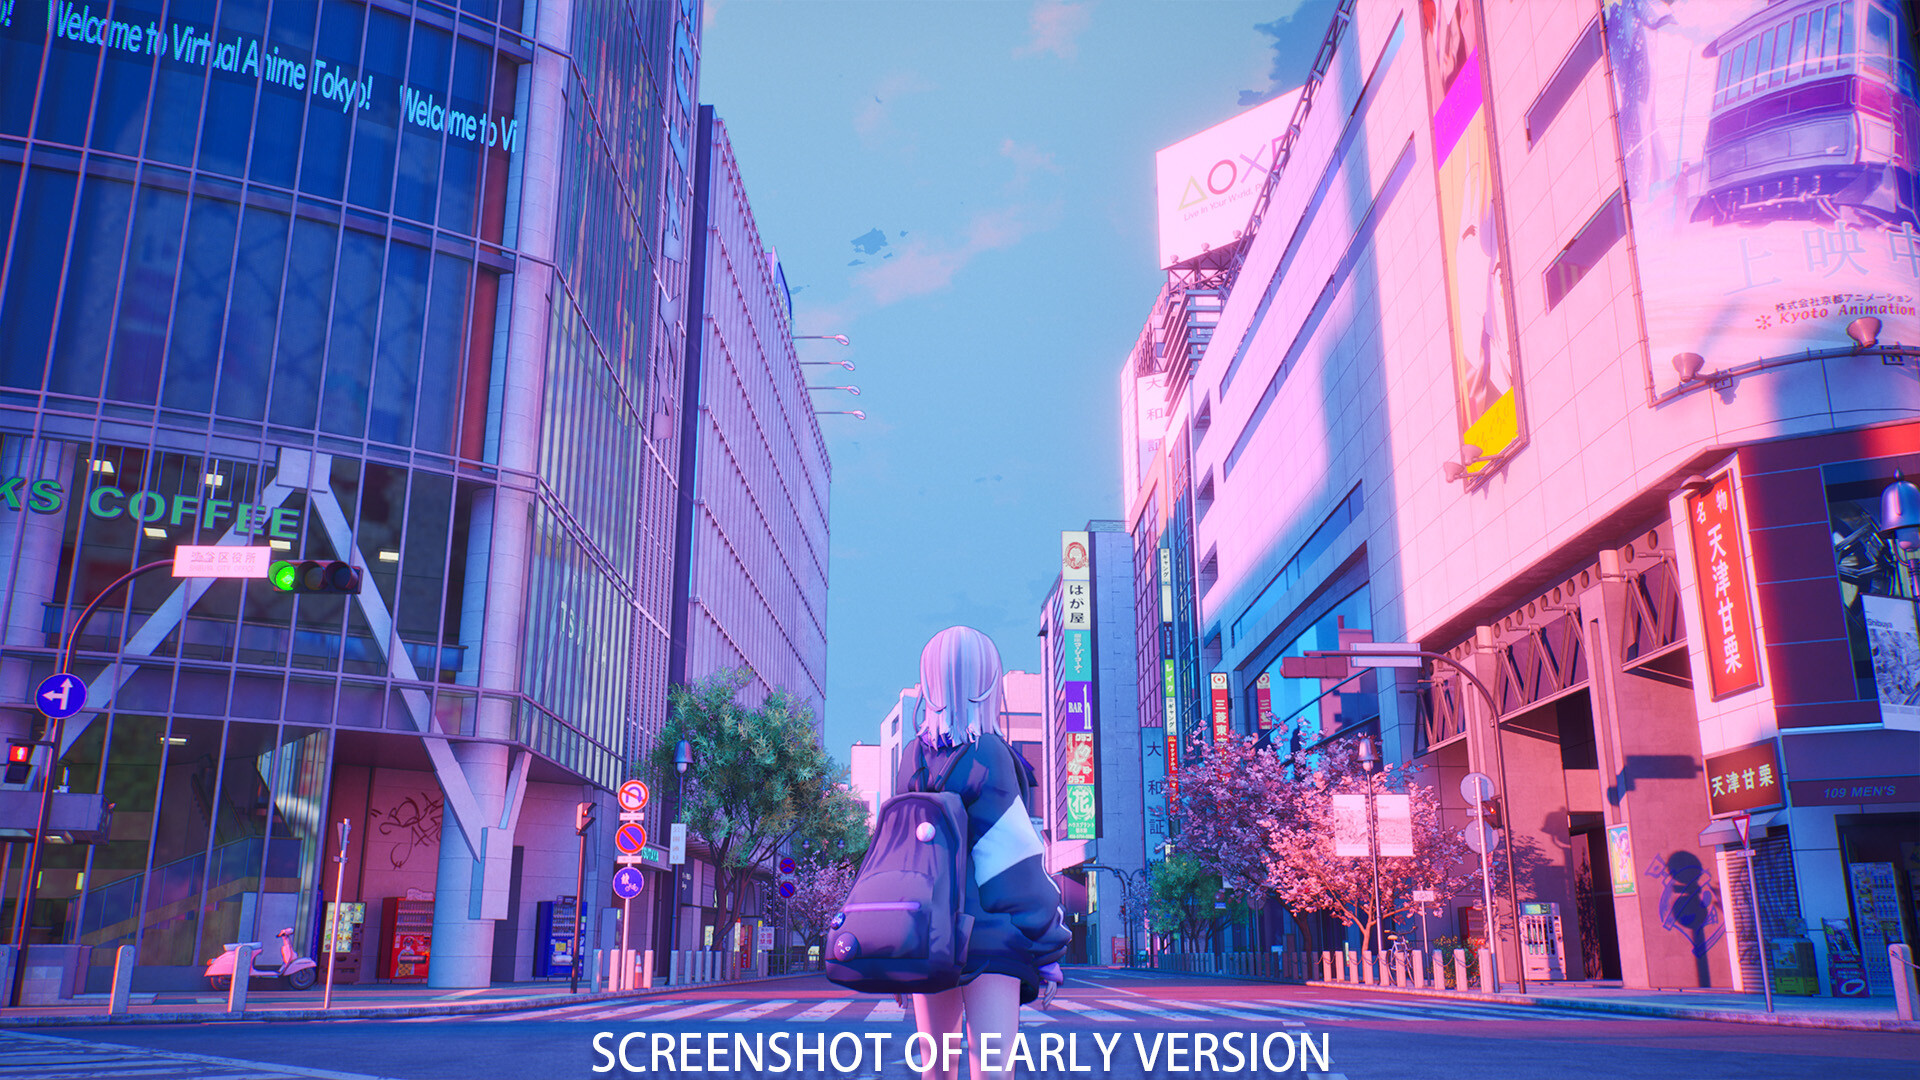 frilly-clam96: Recreate the background as tokyo city from the reference  images anime style